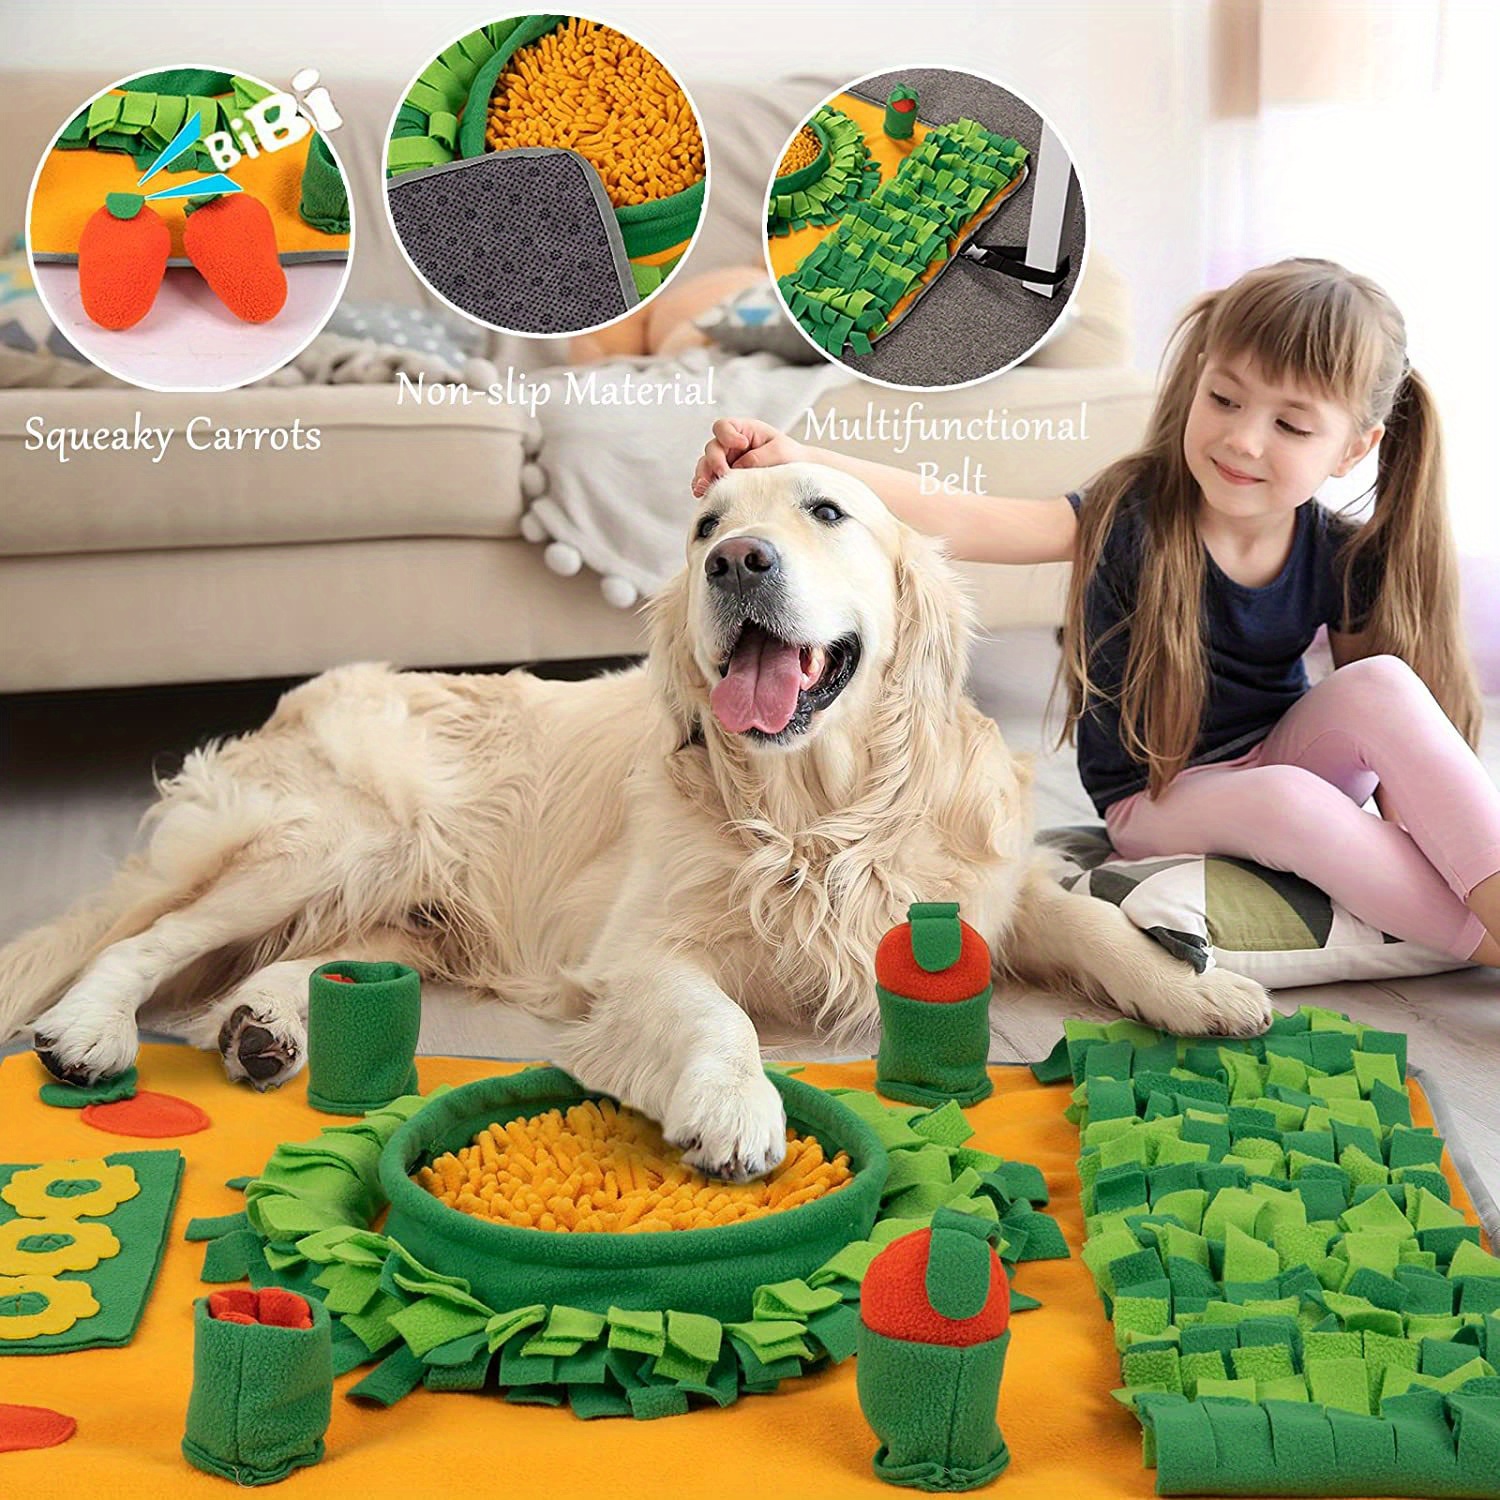 quebran interactive dog toys snuffle mat for dogs, chips dog